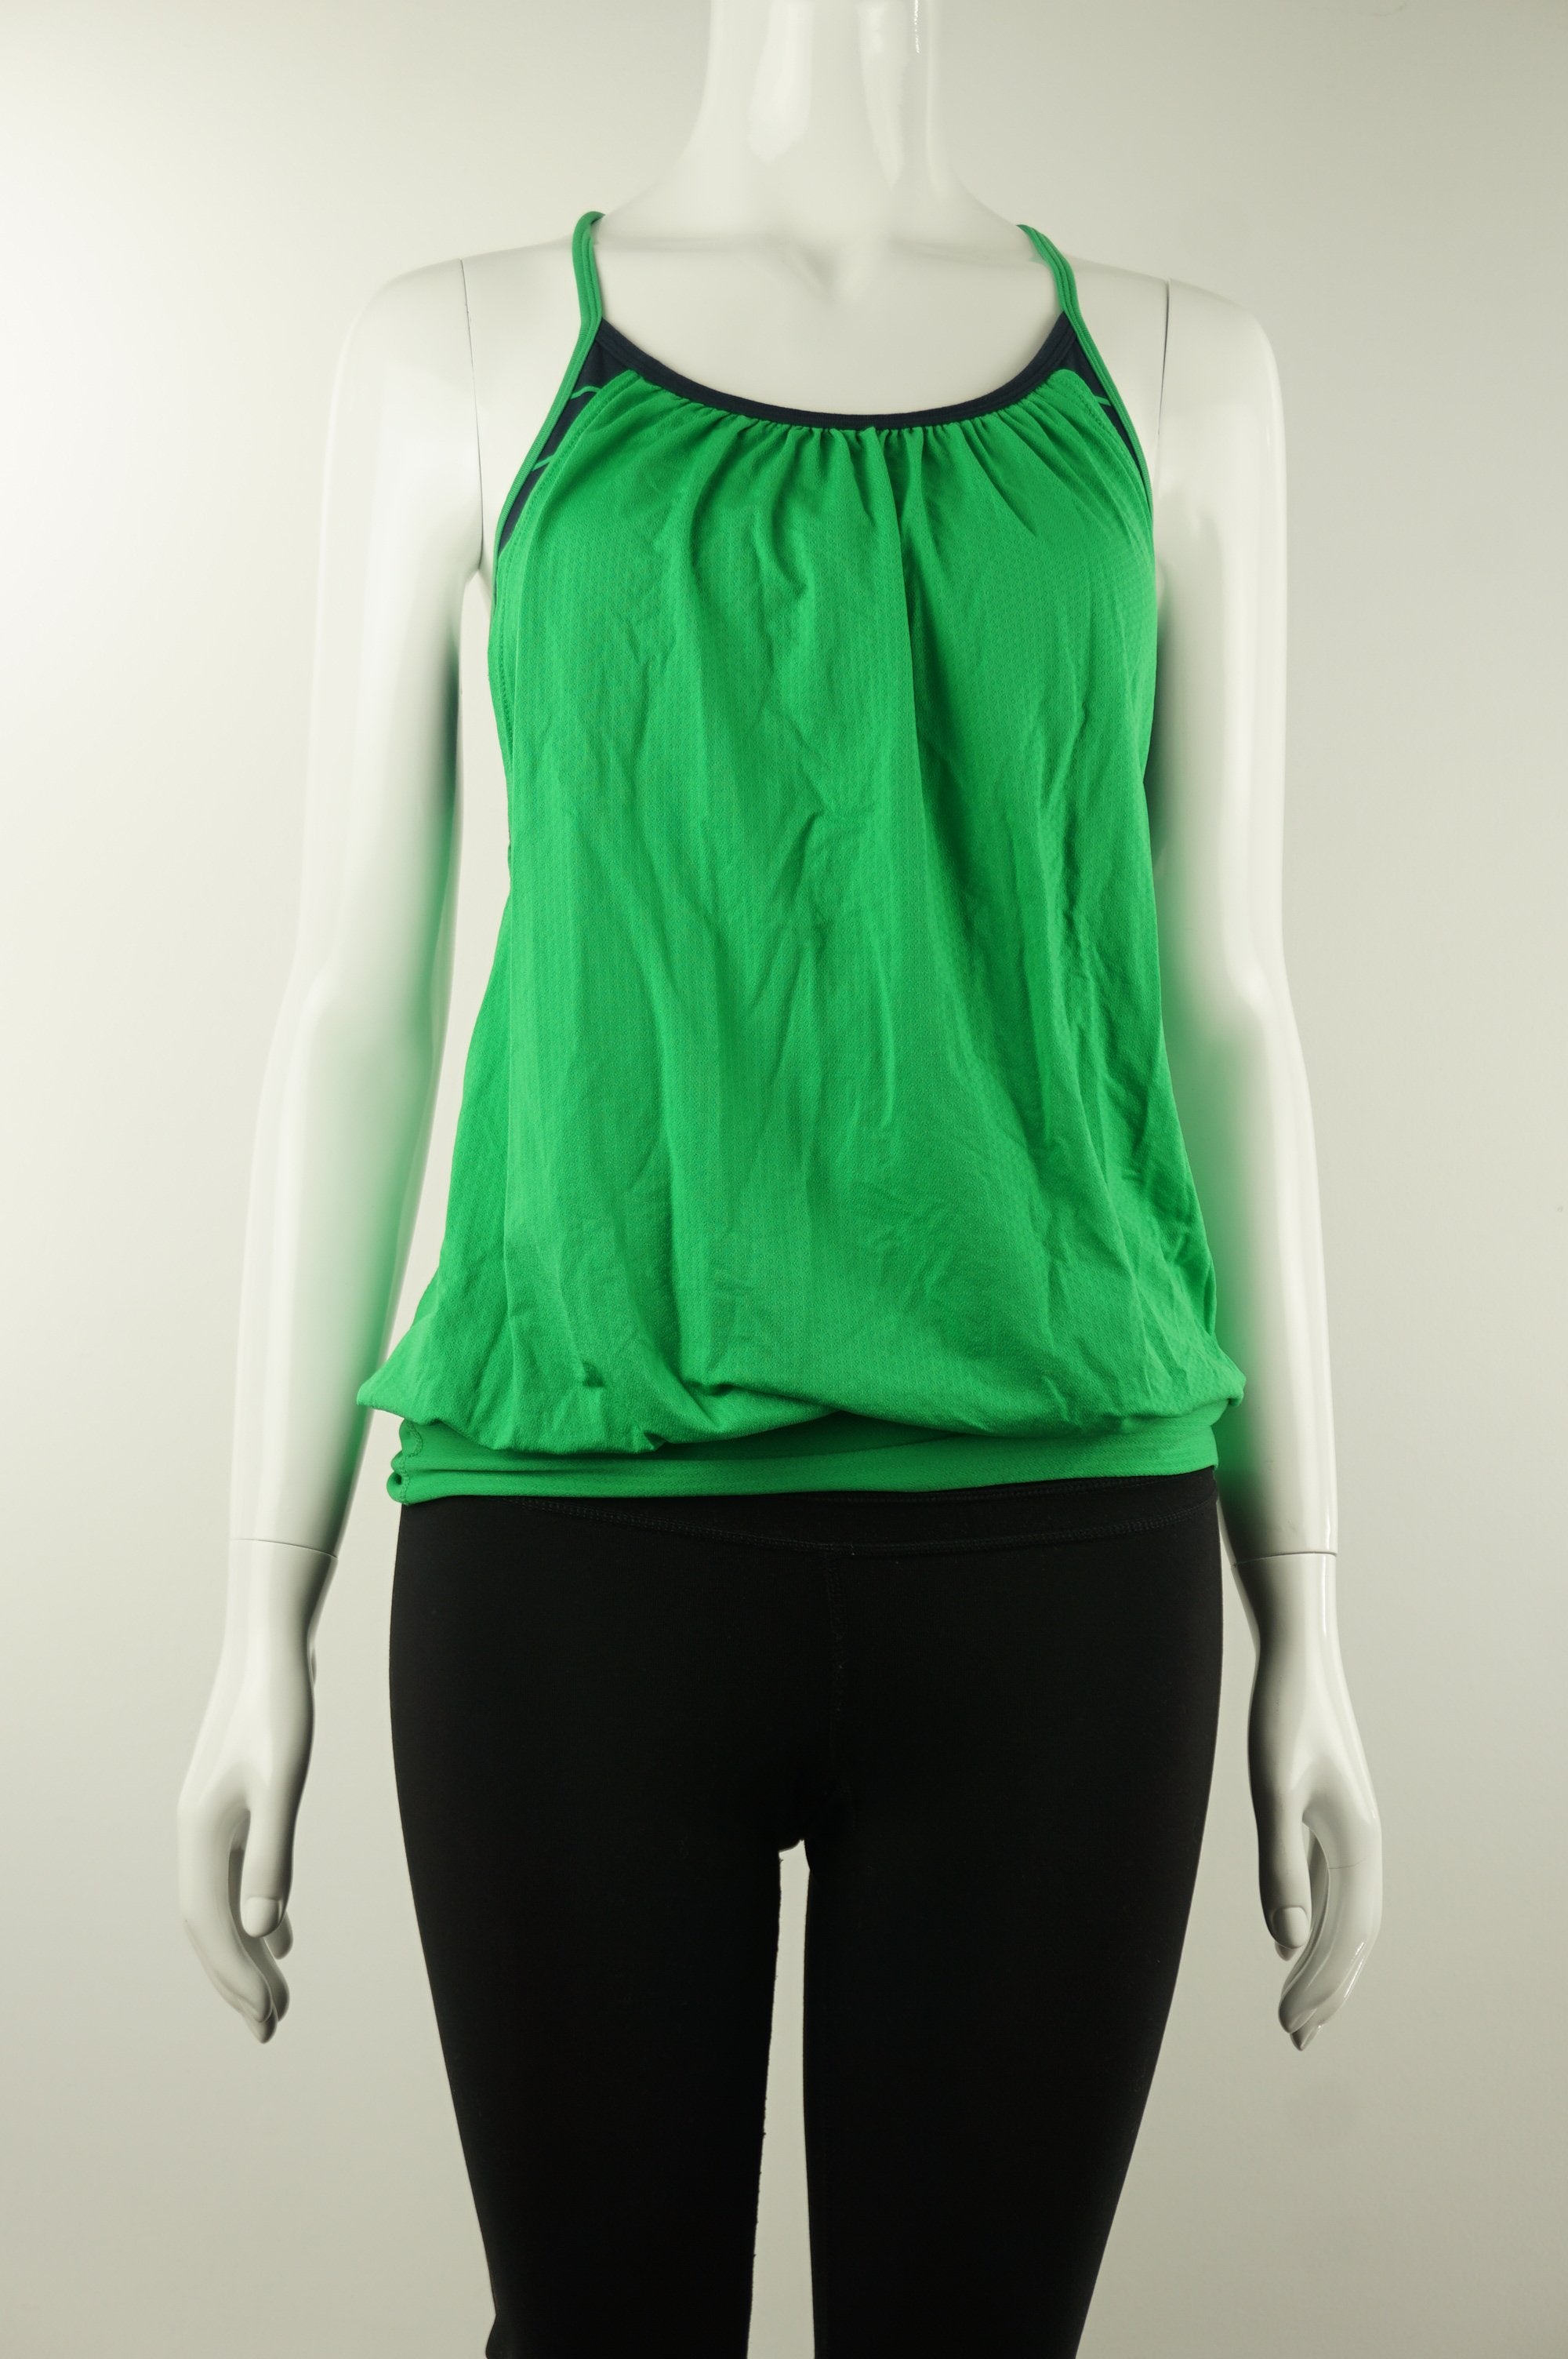 Lululemon Tank Top with Built-in Bra, Bright tank top with built-in bea for all your atheletic needs. , Green, Blue, Cotton and Lyocel, women's Activewear, Tops, women's Green, Blue Activewear, Tops, Lululemon women's Activewear, Tops, women's tabk top, lululemon women's athletic top